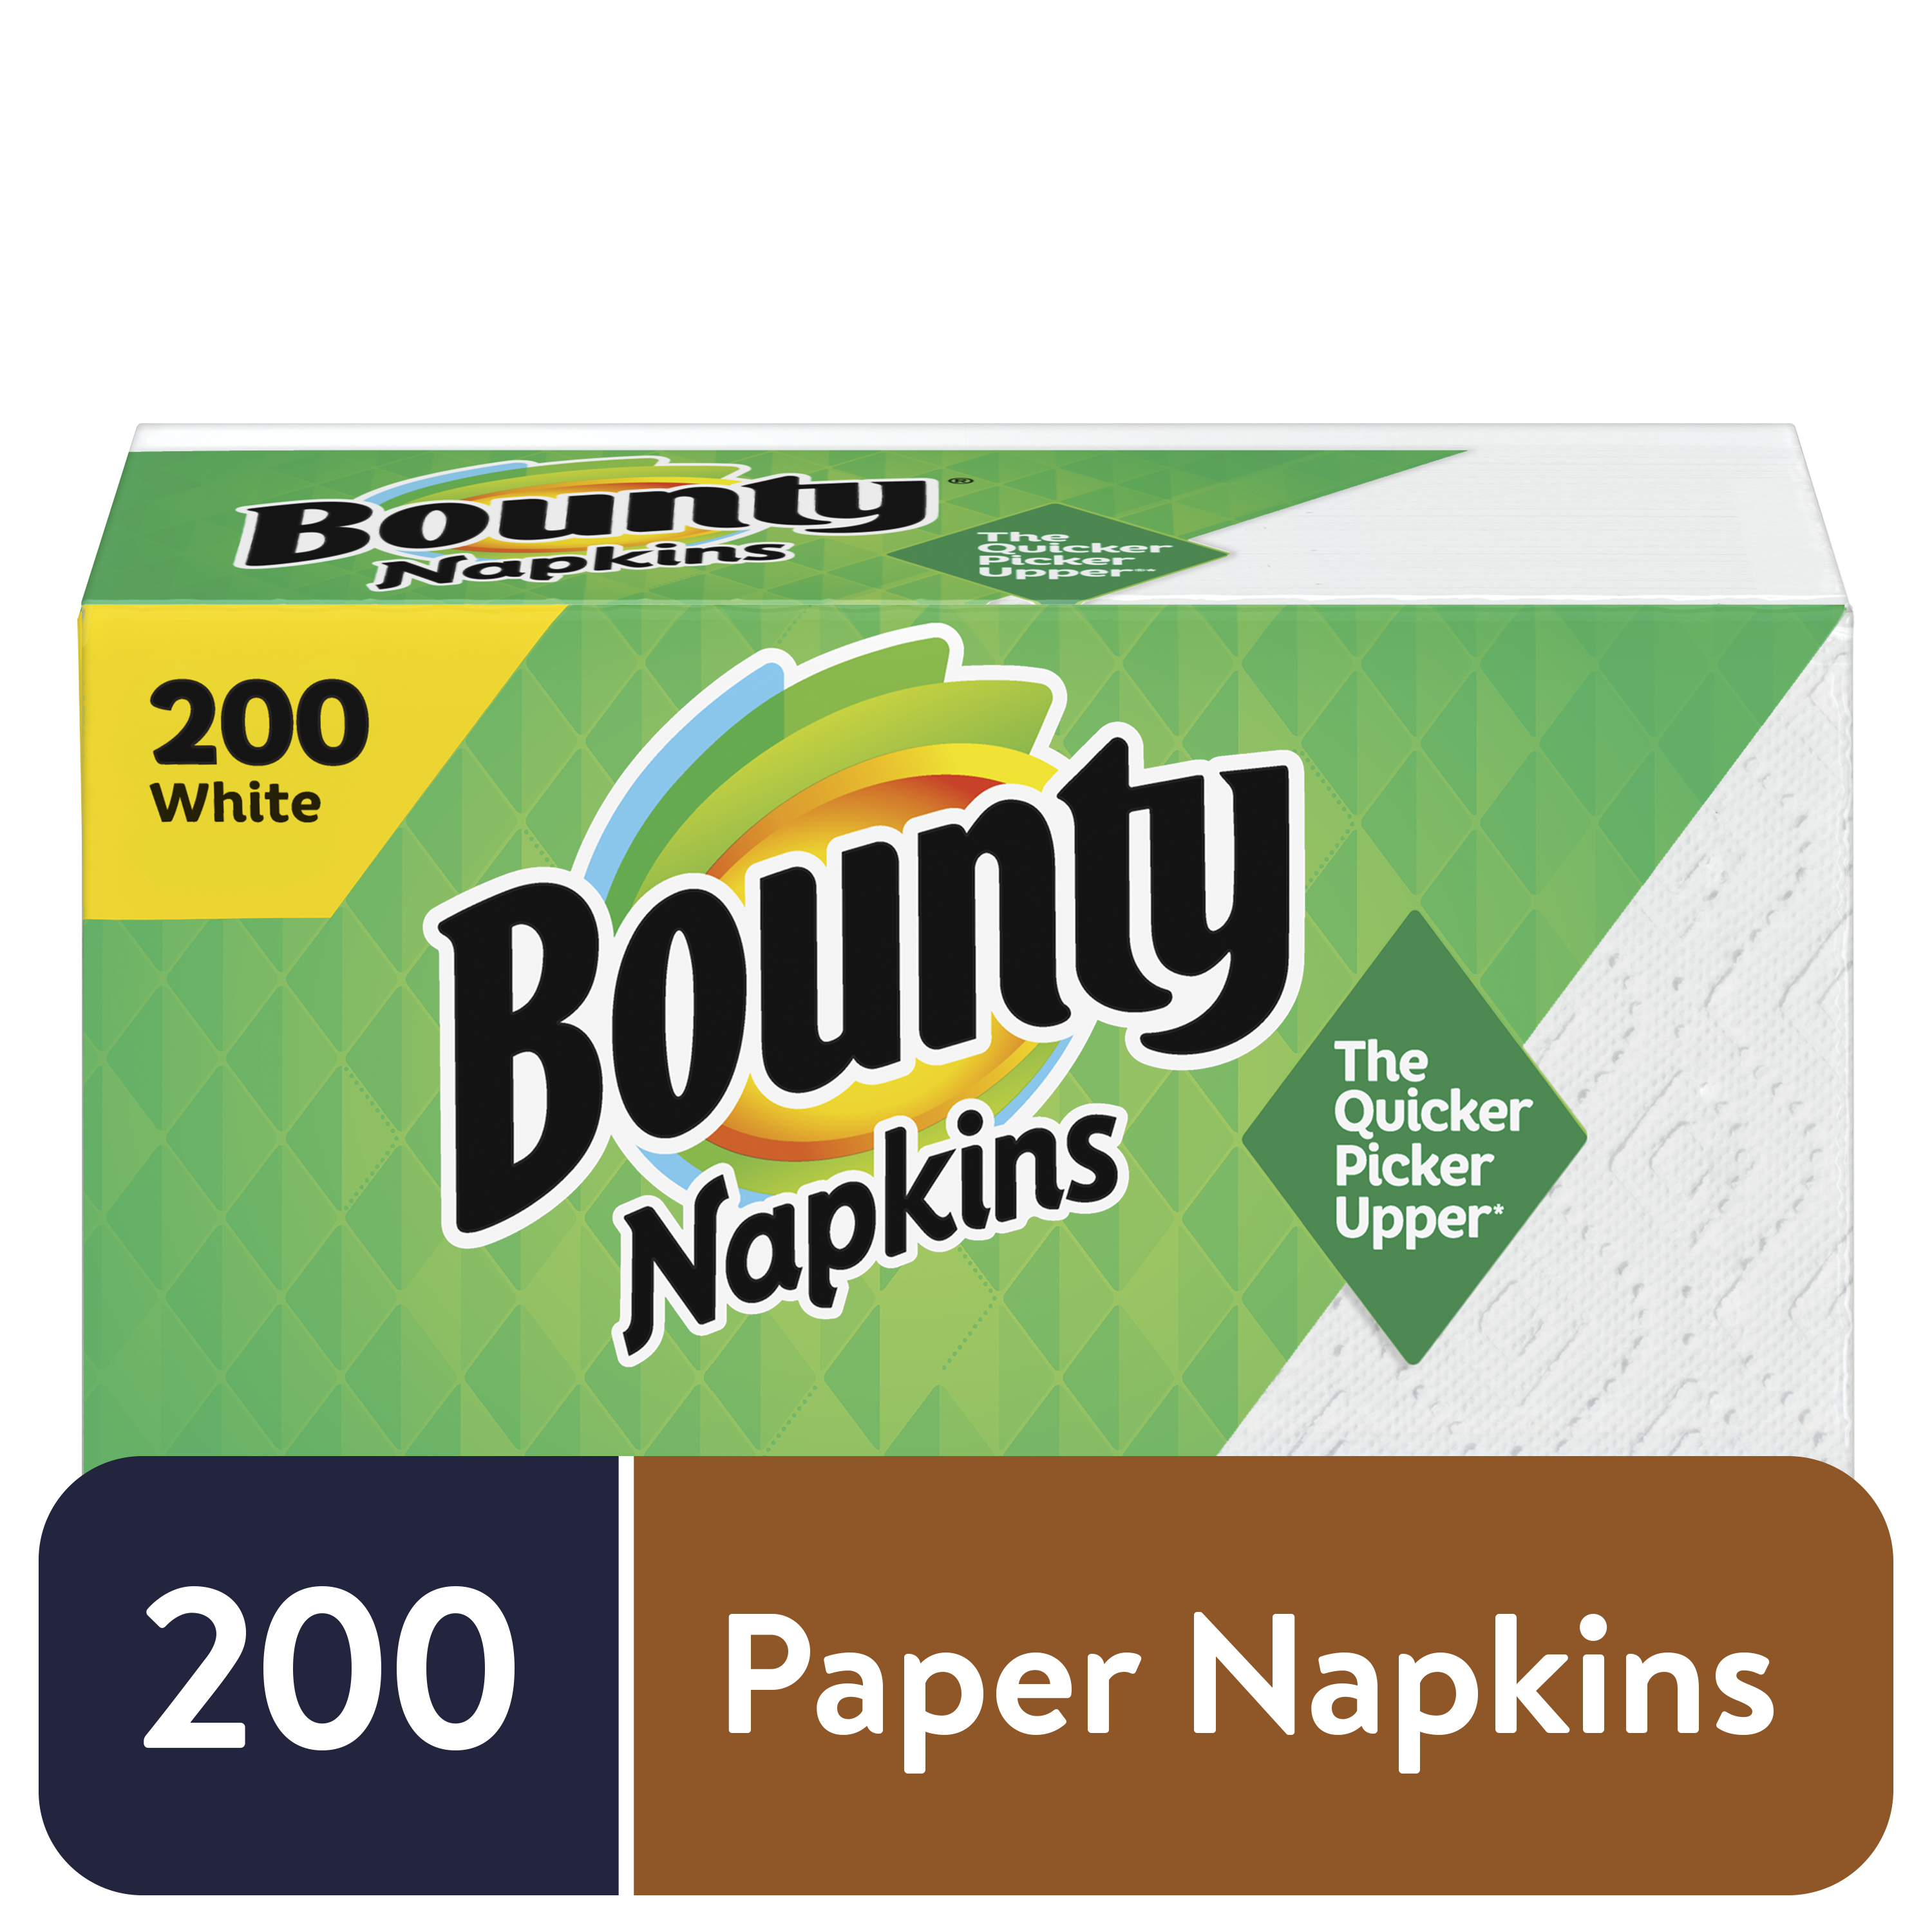 Bounty Paper Napkins, White, 200 Count - image 1 of 15